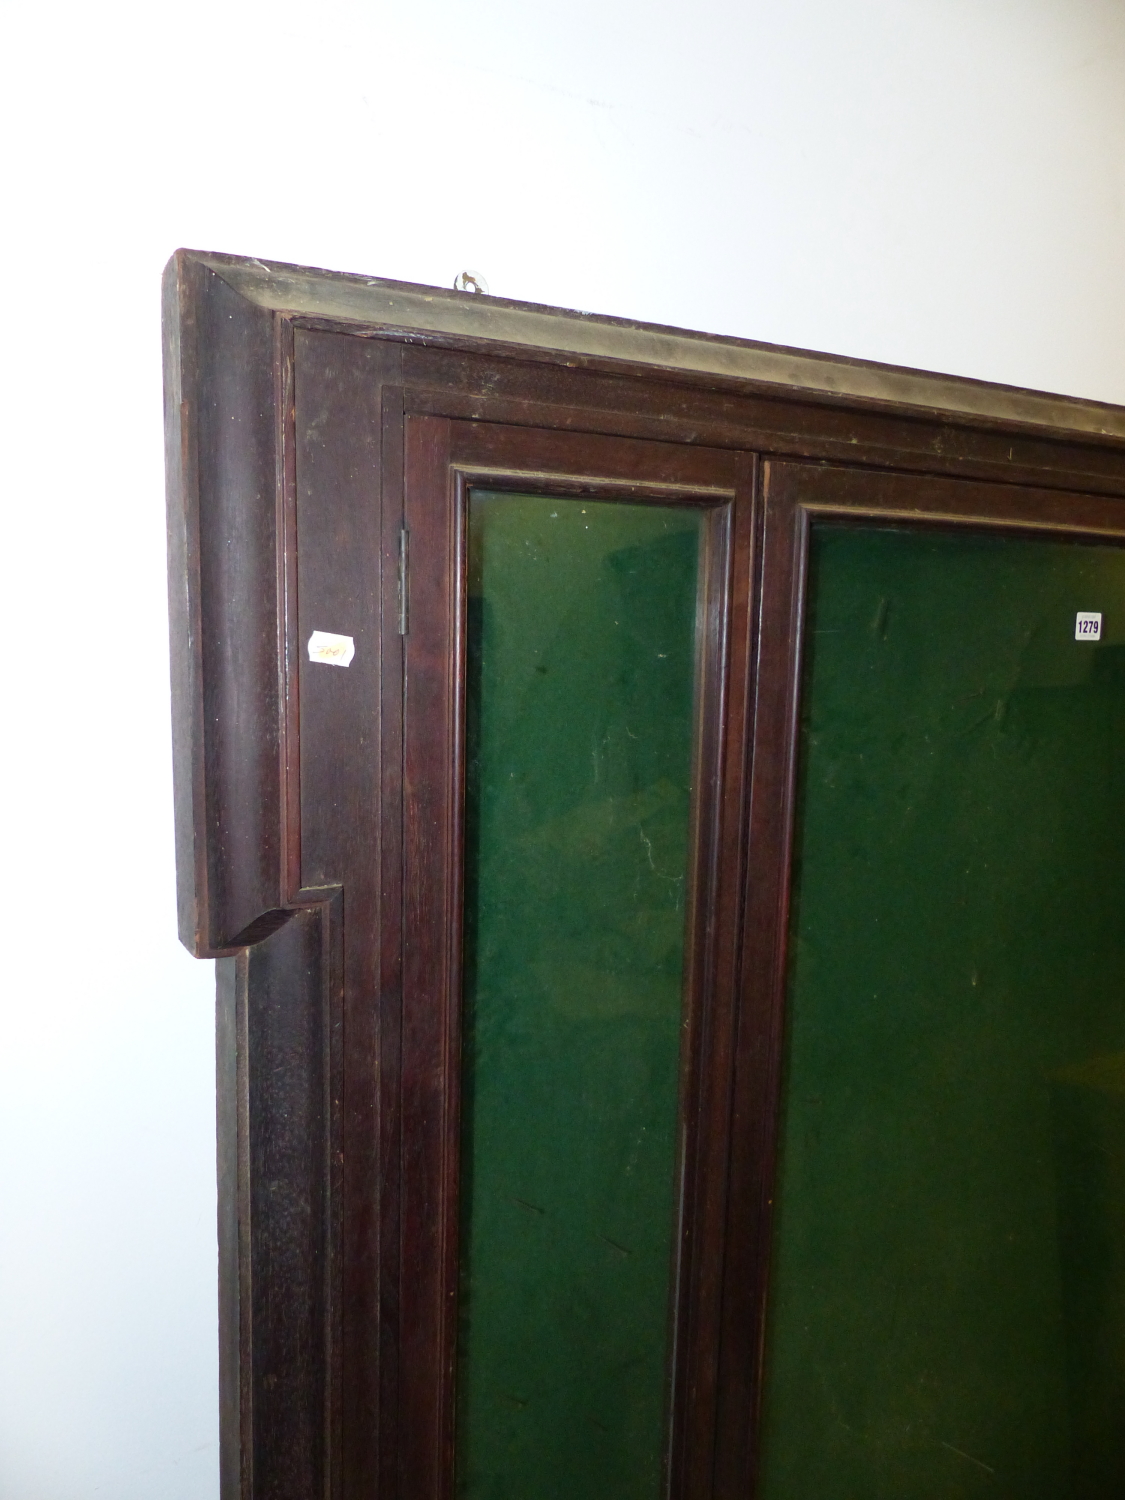 A LATE VICTORIAN MAHOGANY FRAMED GLAZED ROSETTE CABINET OR NOTICE BOARD WITH LOCKING CENTRAL DOOR. - Image 2 of 4